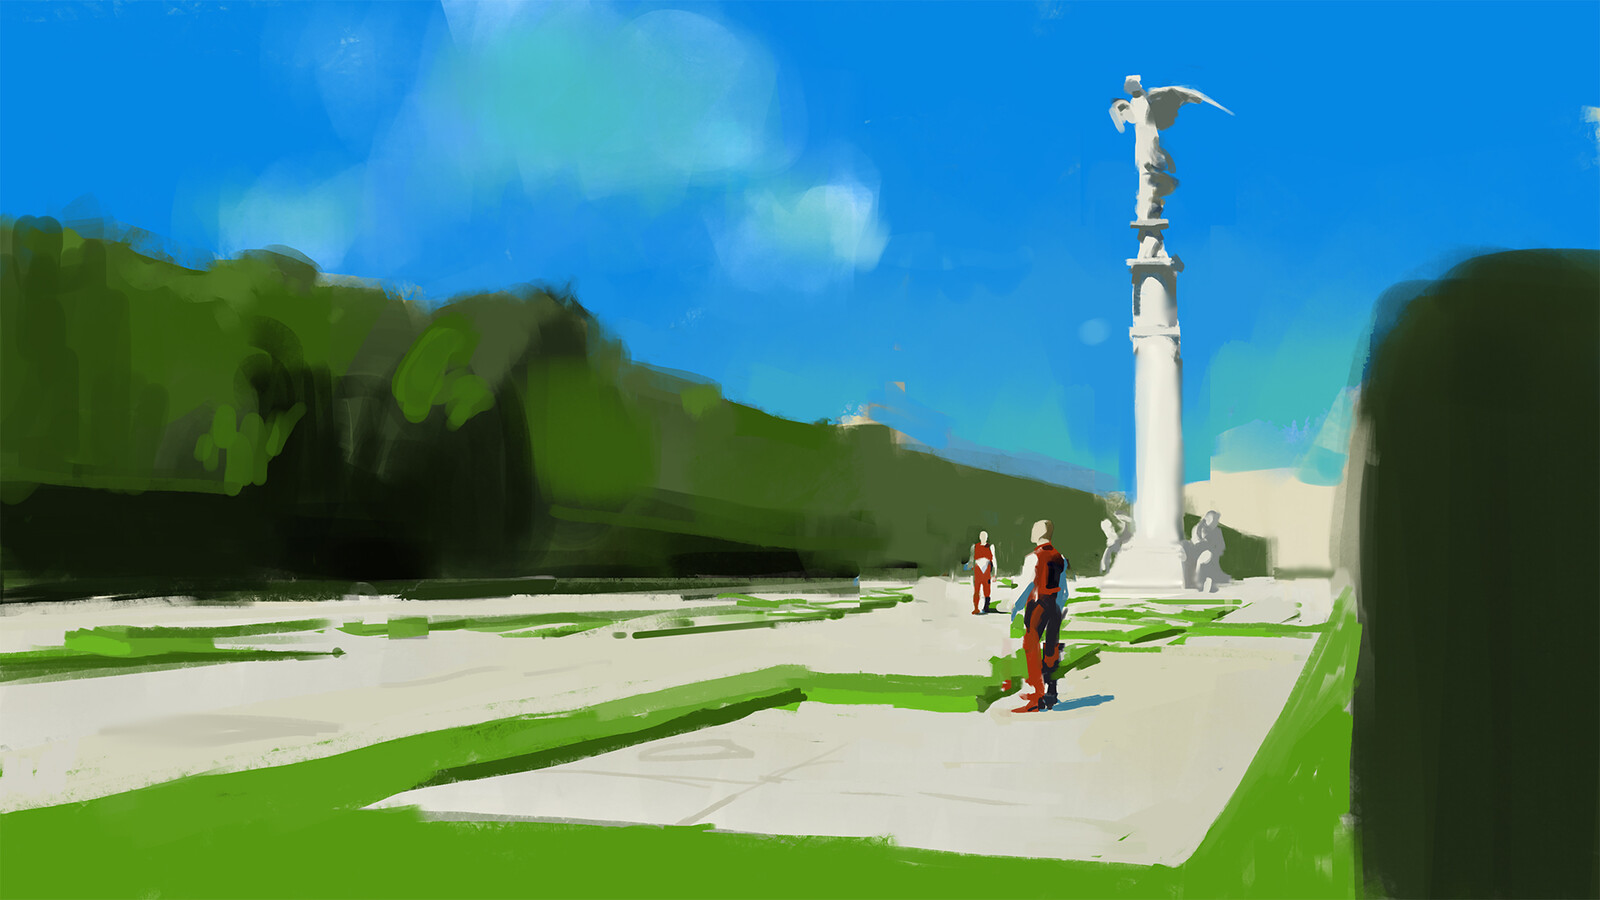 30 minute speed sketch for "statue" theme